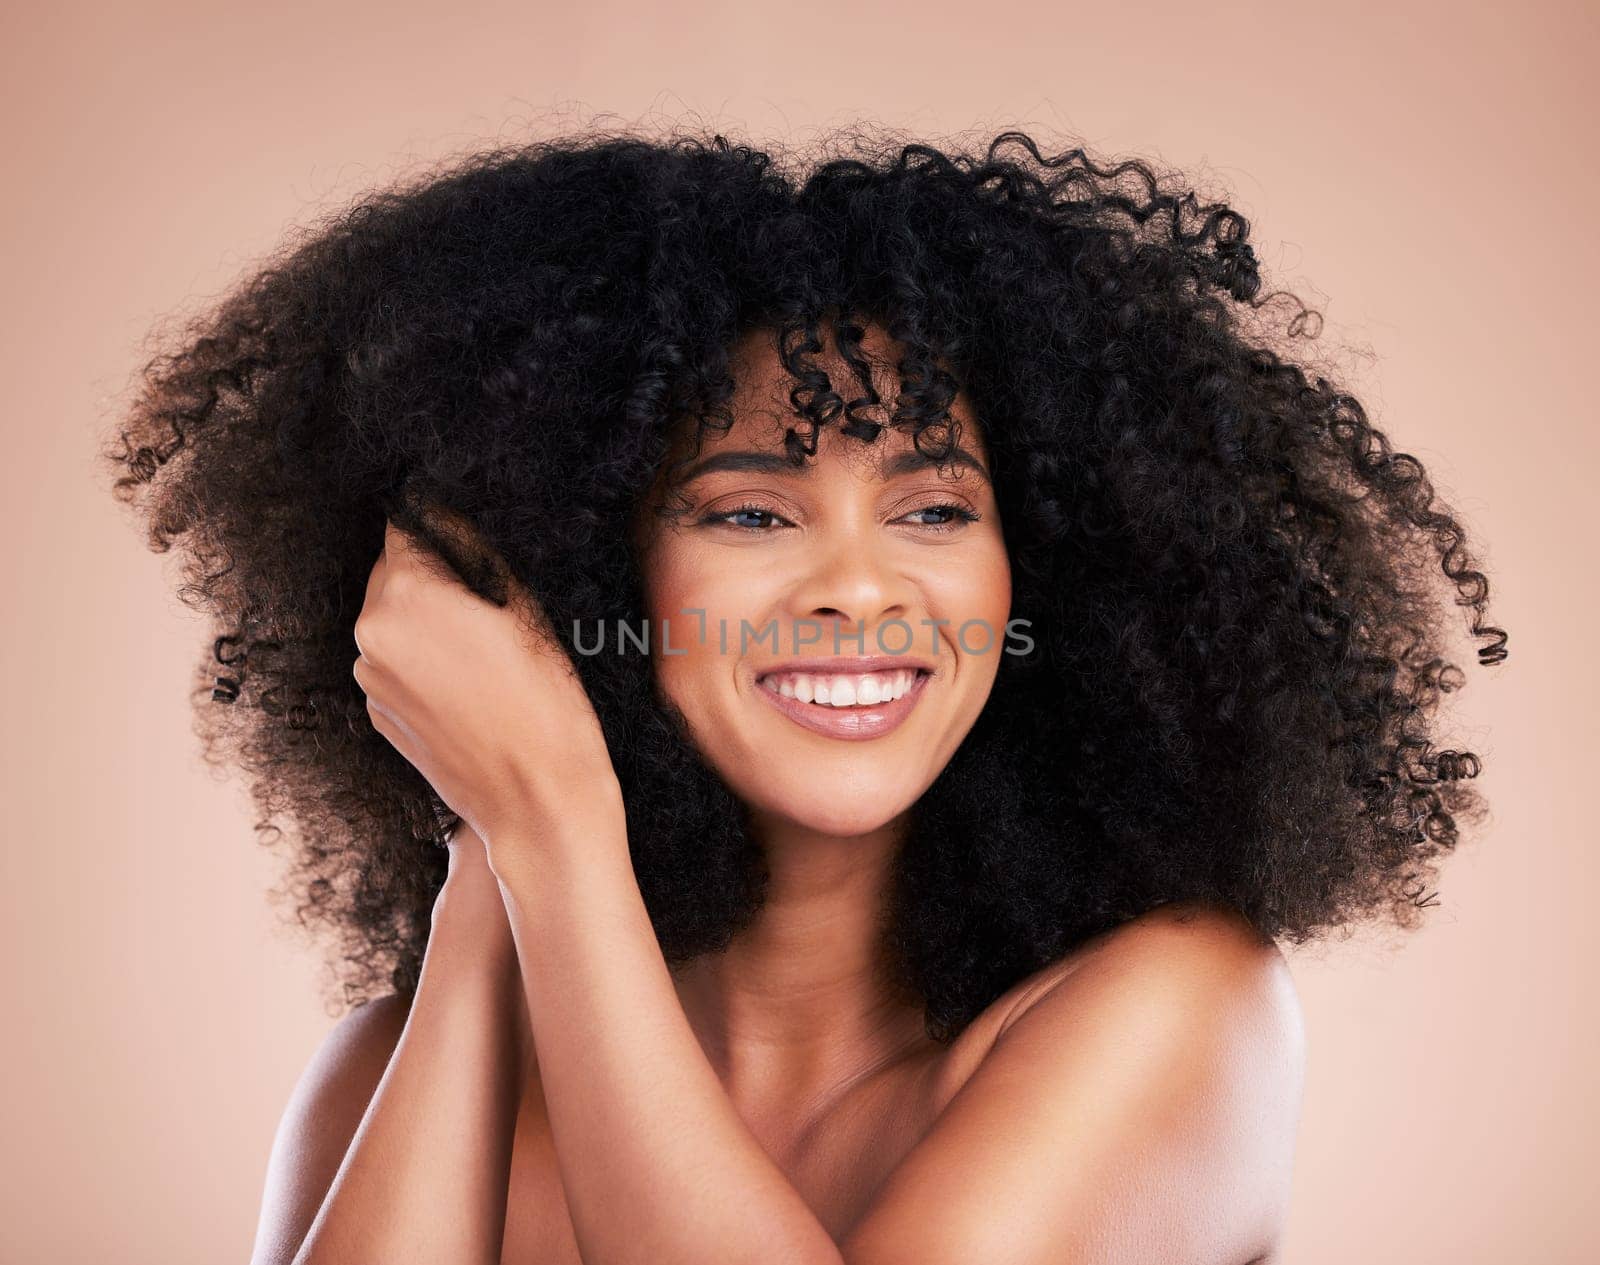 Curly hair texture, black woman and makeup of a young model with a healthy afro from salon treatment. Happy face, cosmetics and African person with wellness, skincare and smile from beauty in studio.